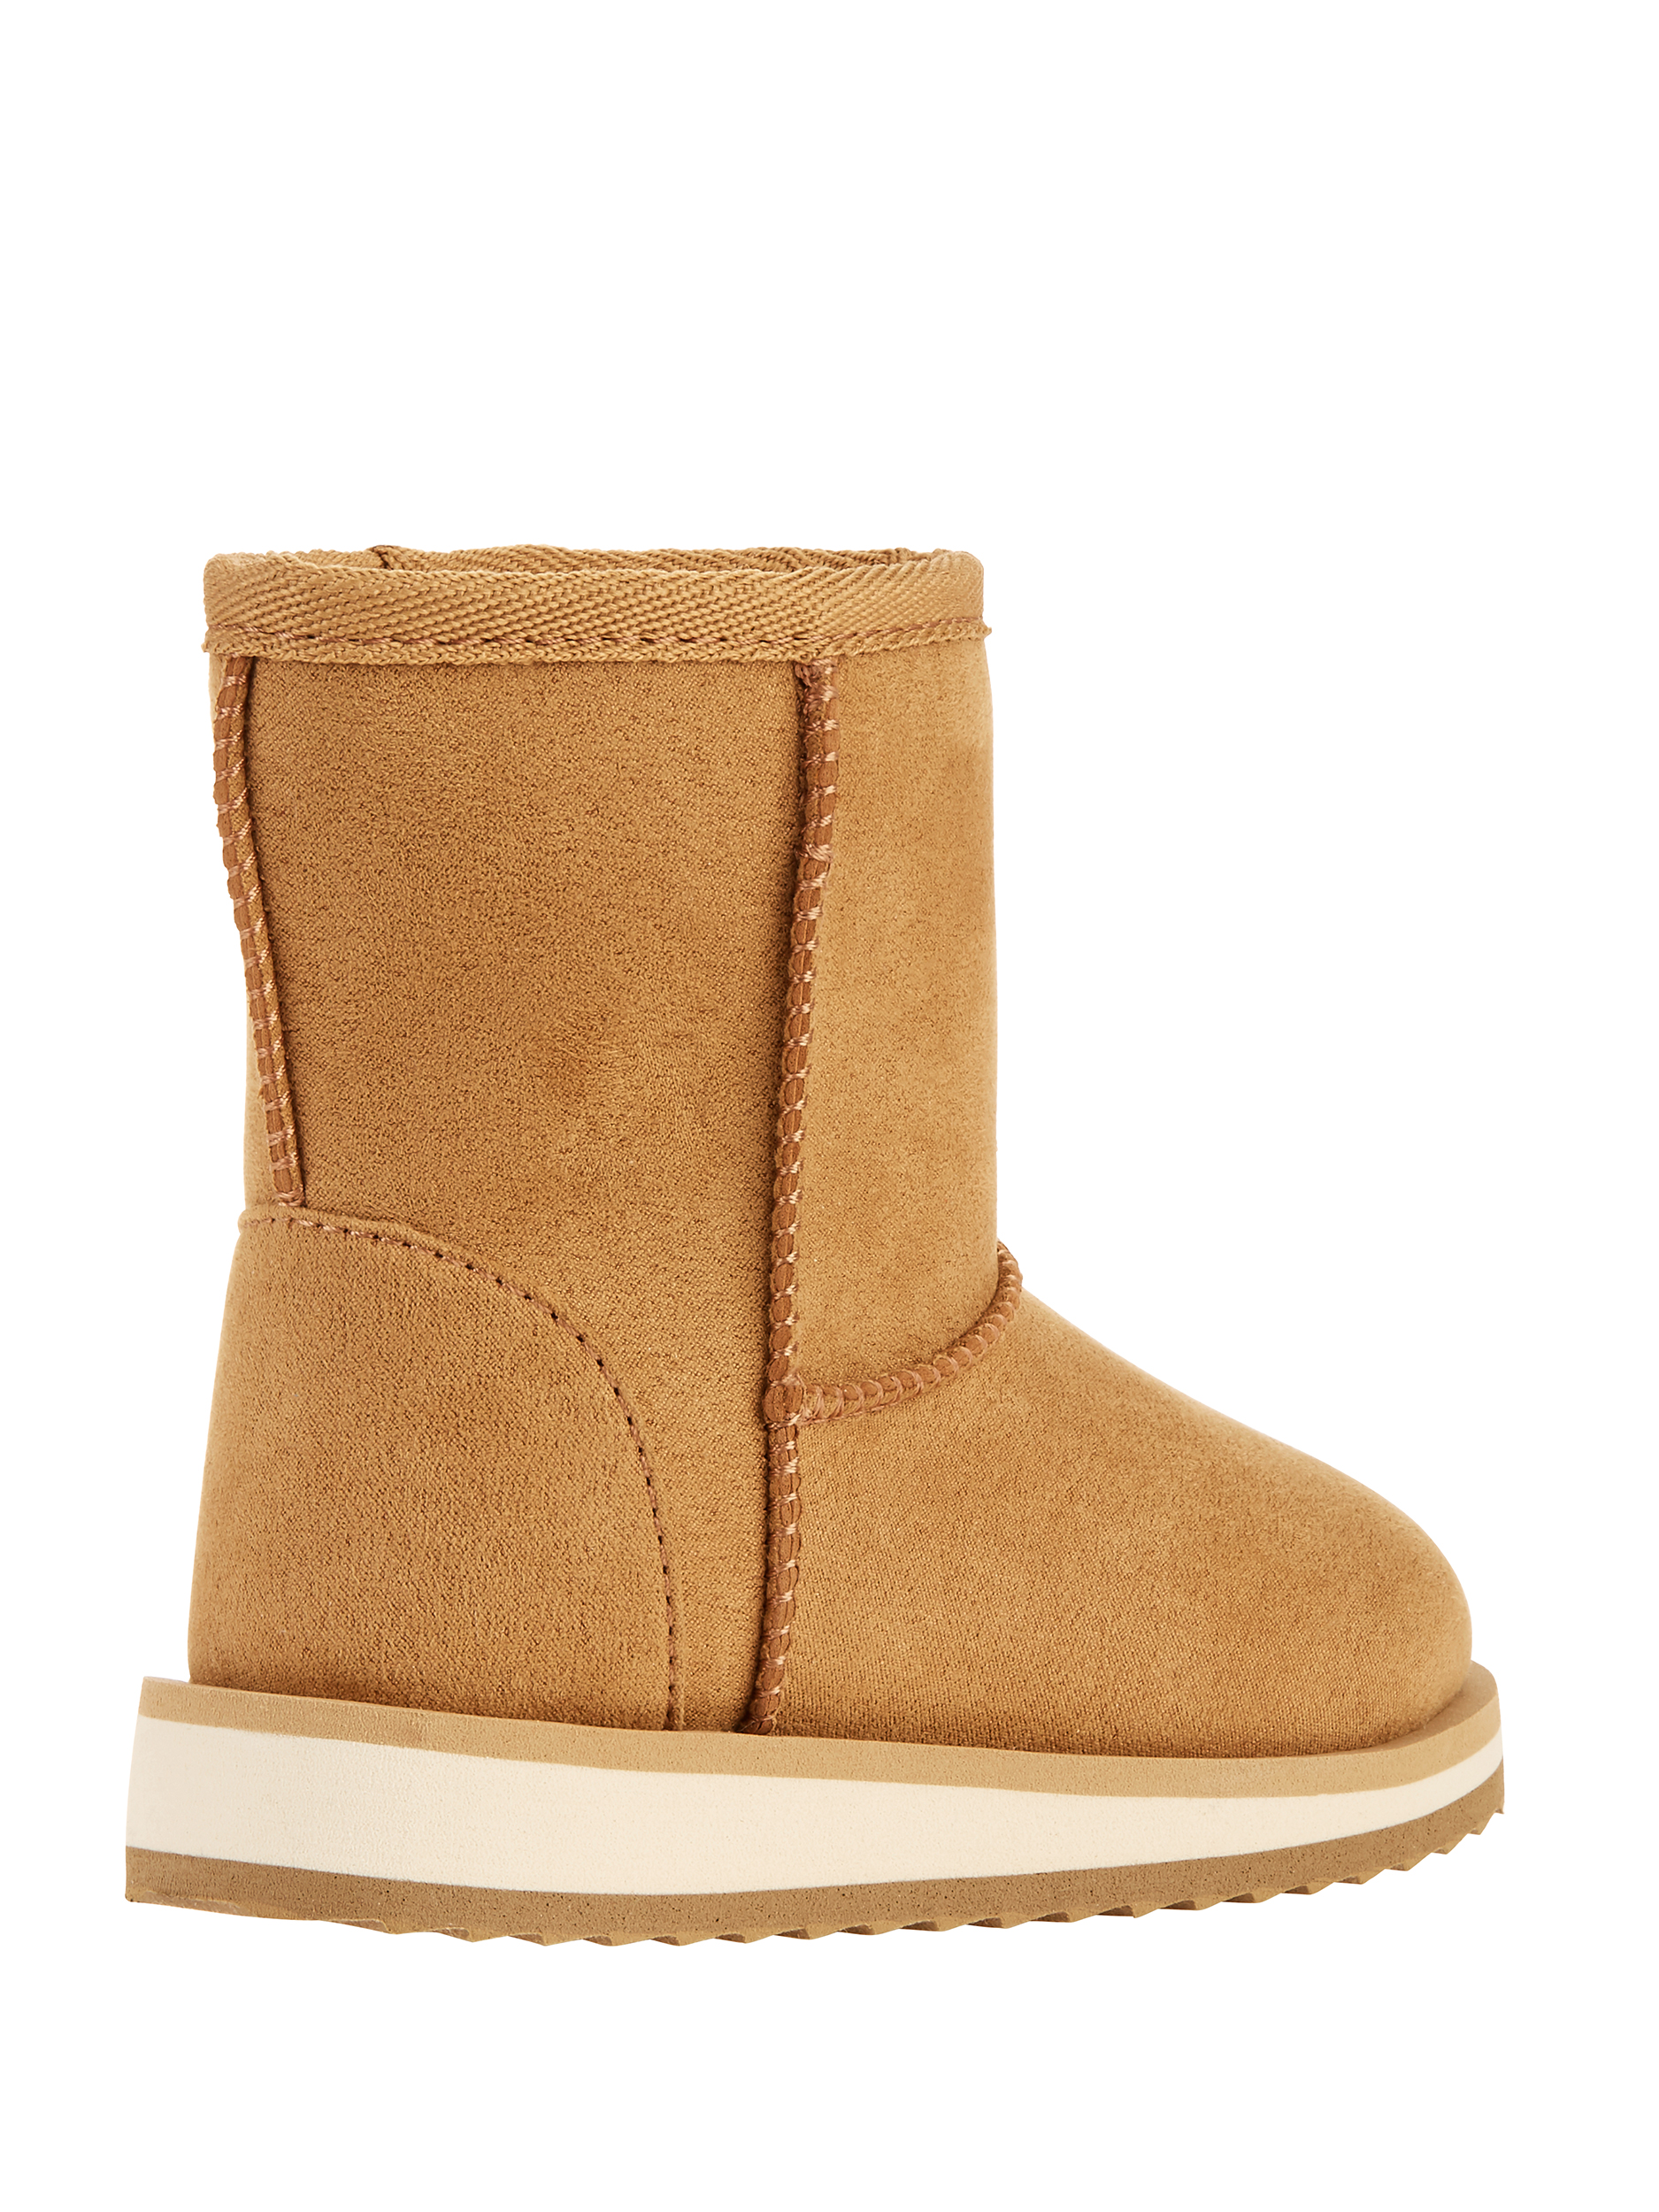 Wonder Nation Girls Faux Shearling Boots - image 3 of 6